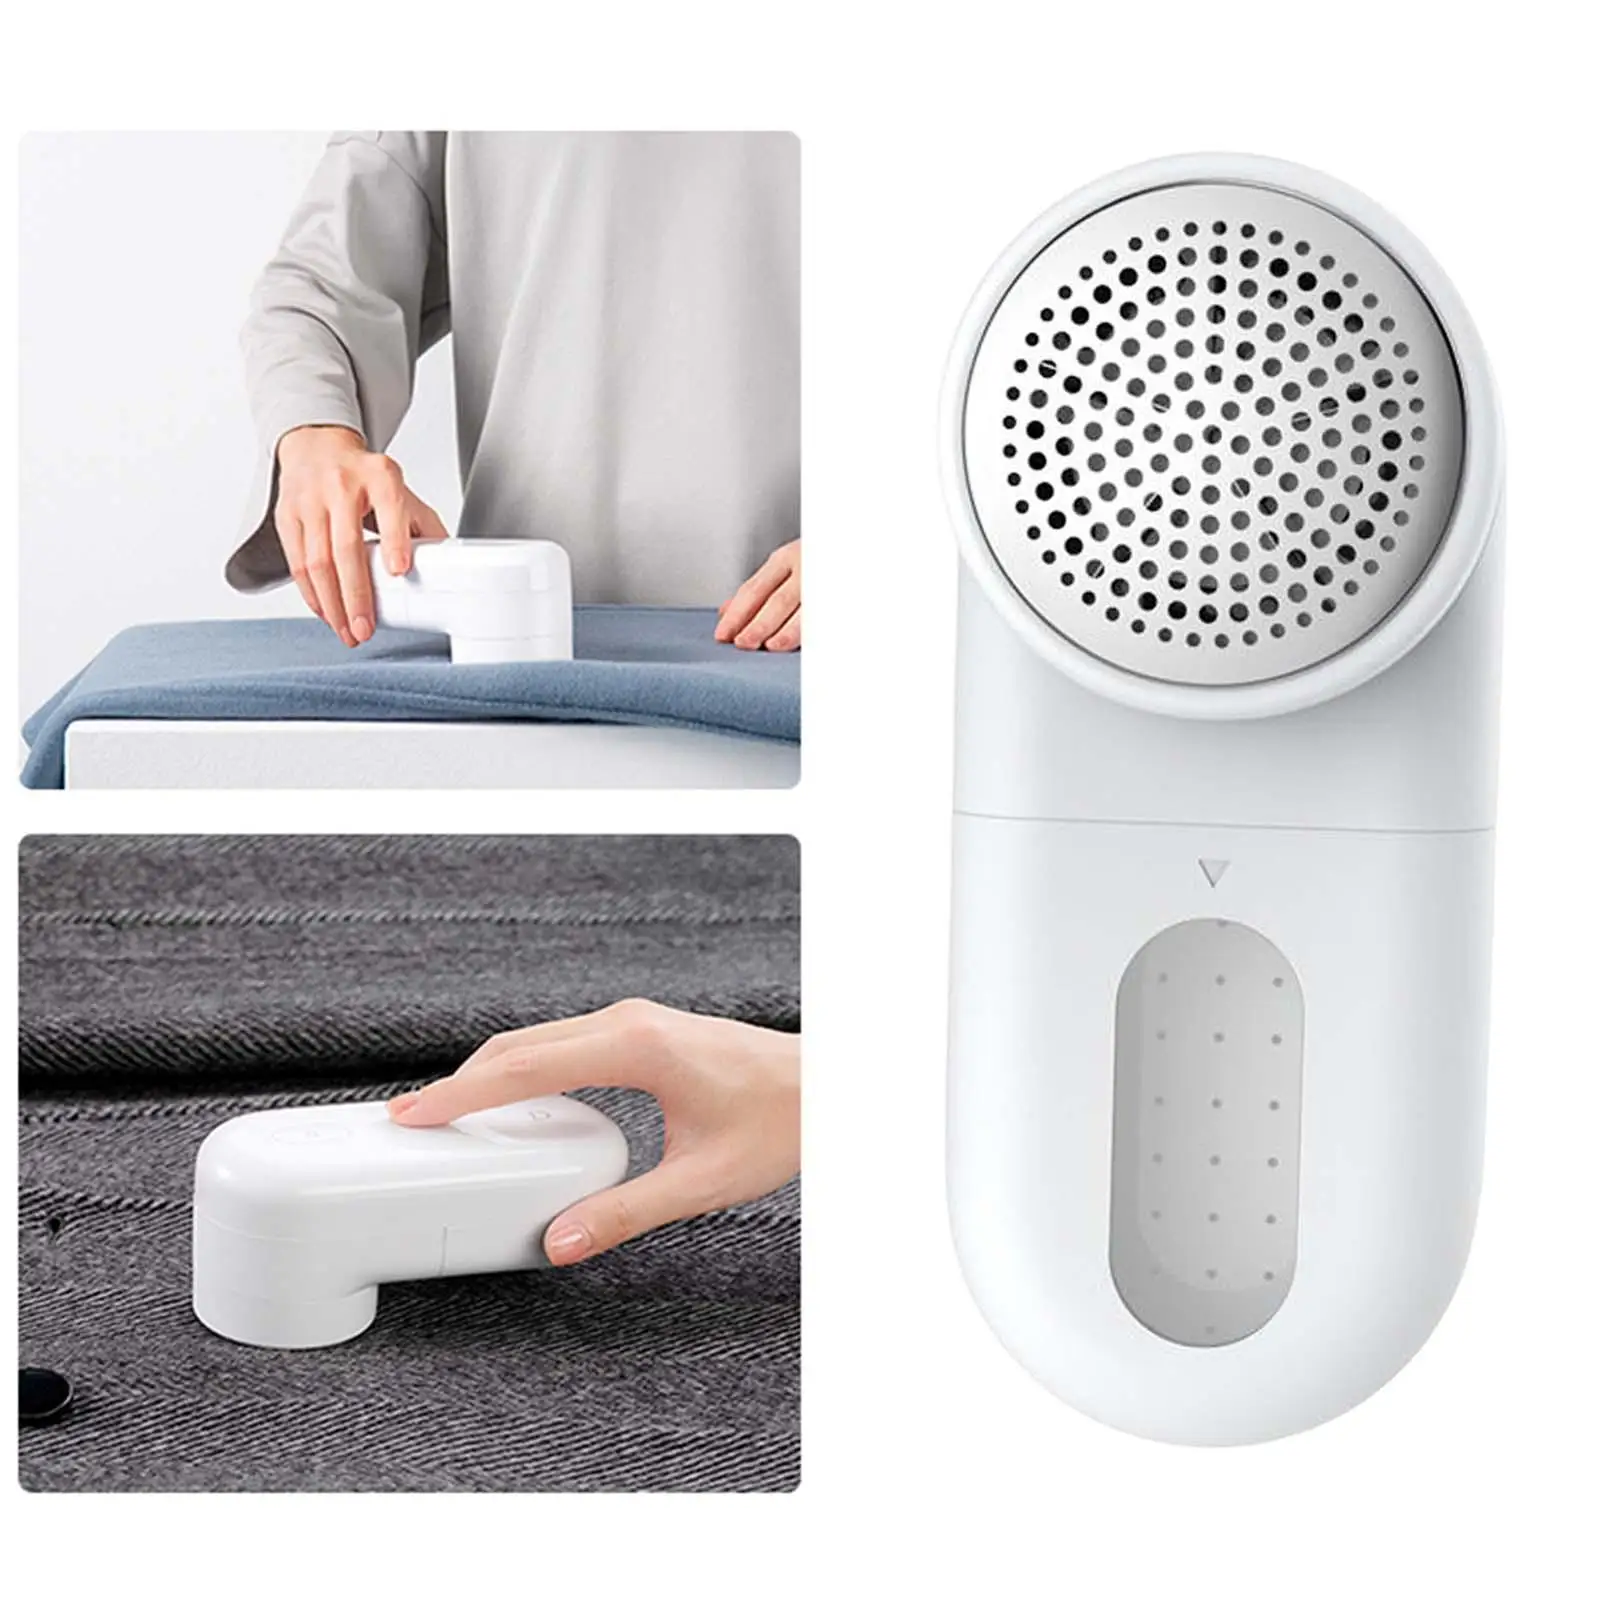 Lint Remover 5 Leaf Blades with Brush Pet Hair Pilling Remover Tool Electric Clothes Sweater Fabric Shaver Fuzz Remover Clothes